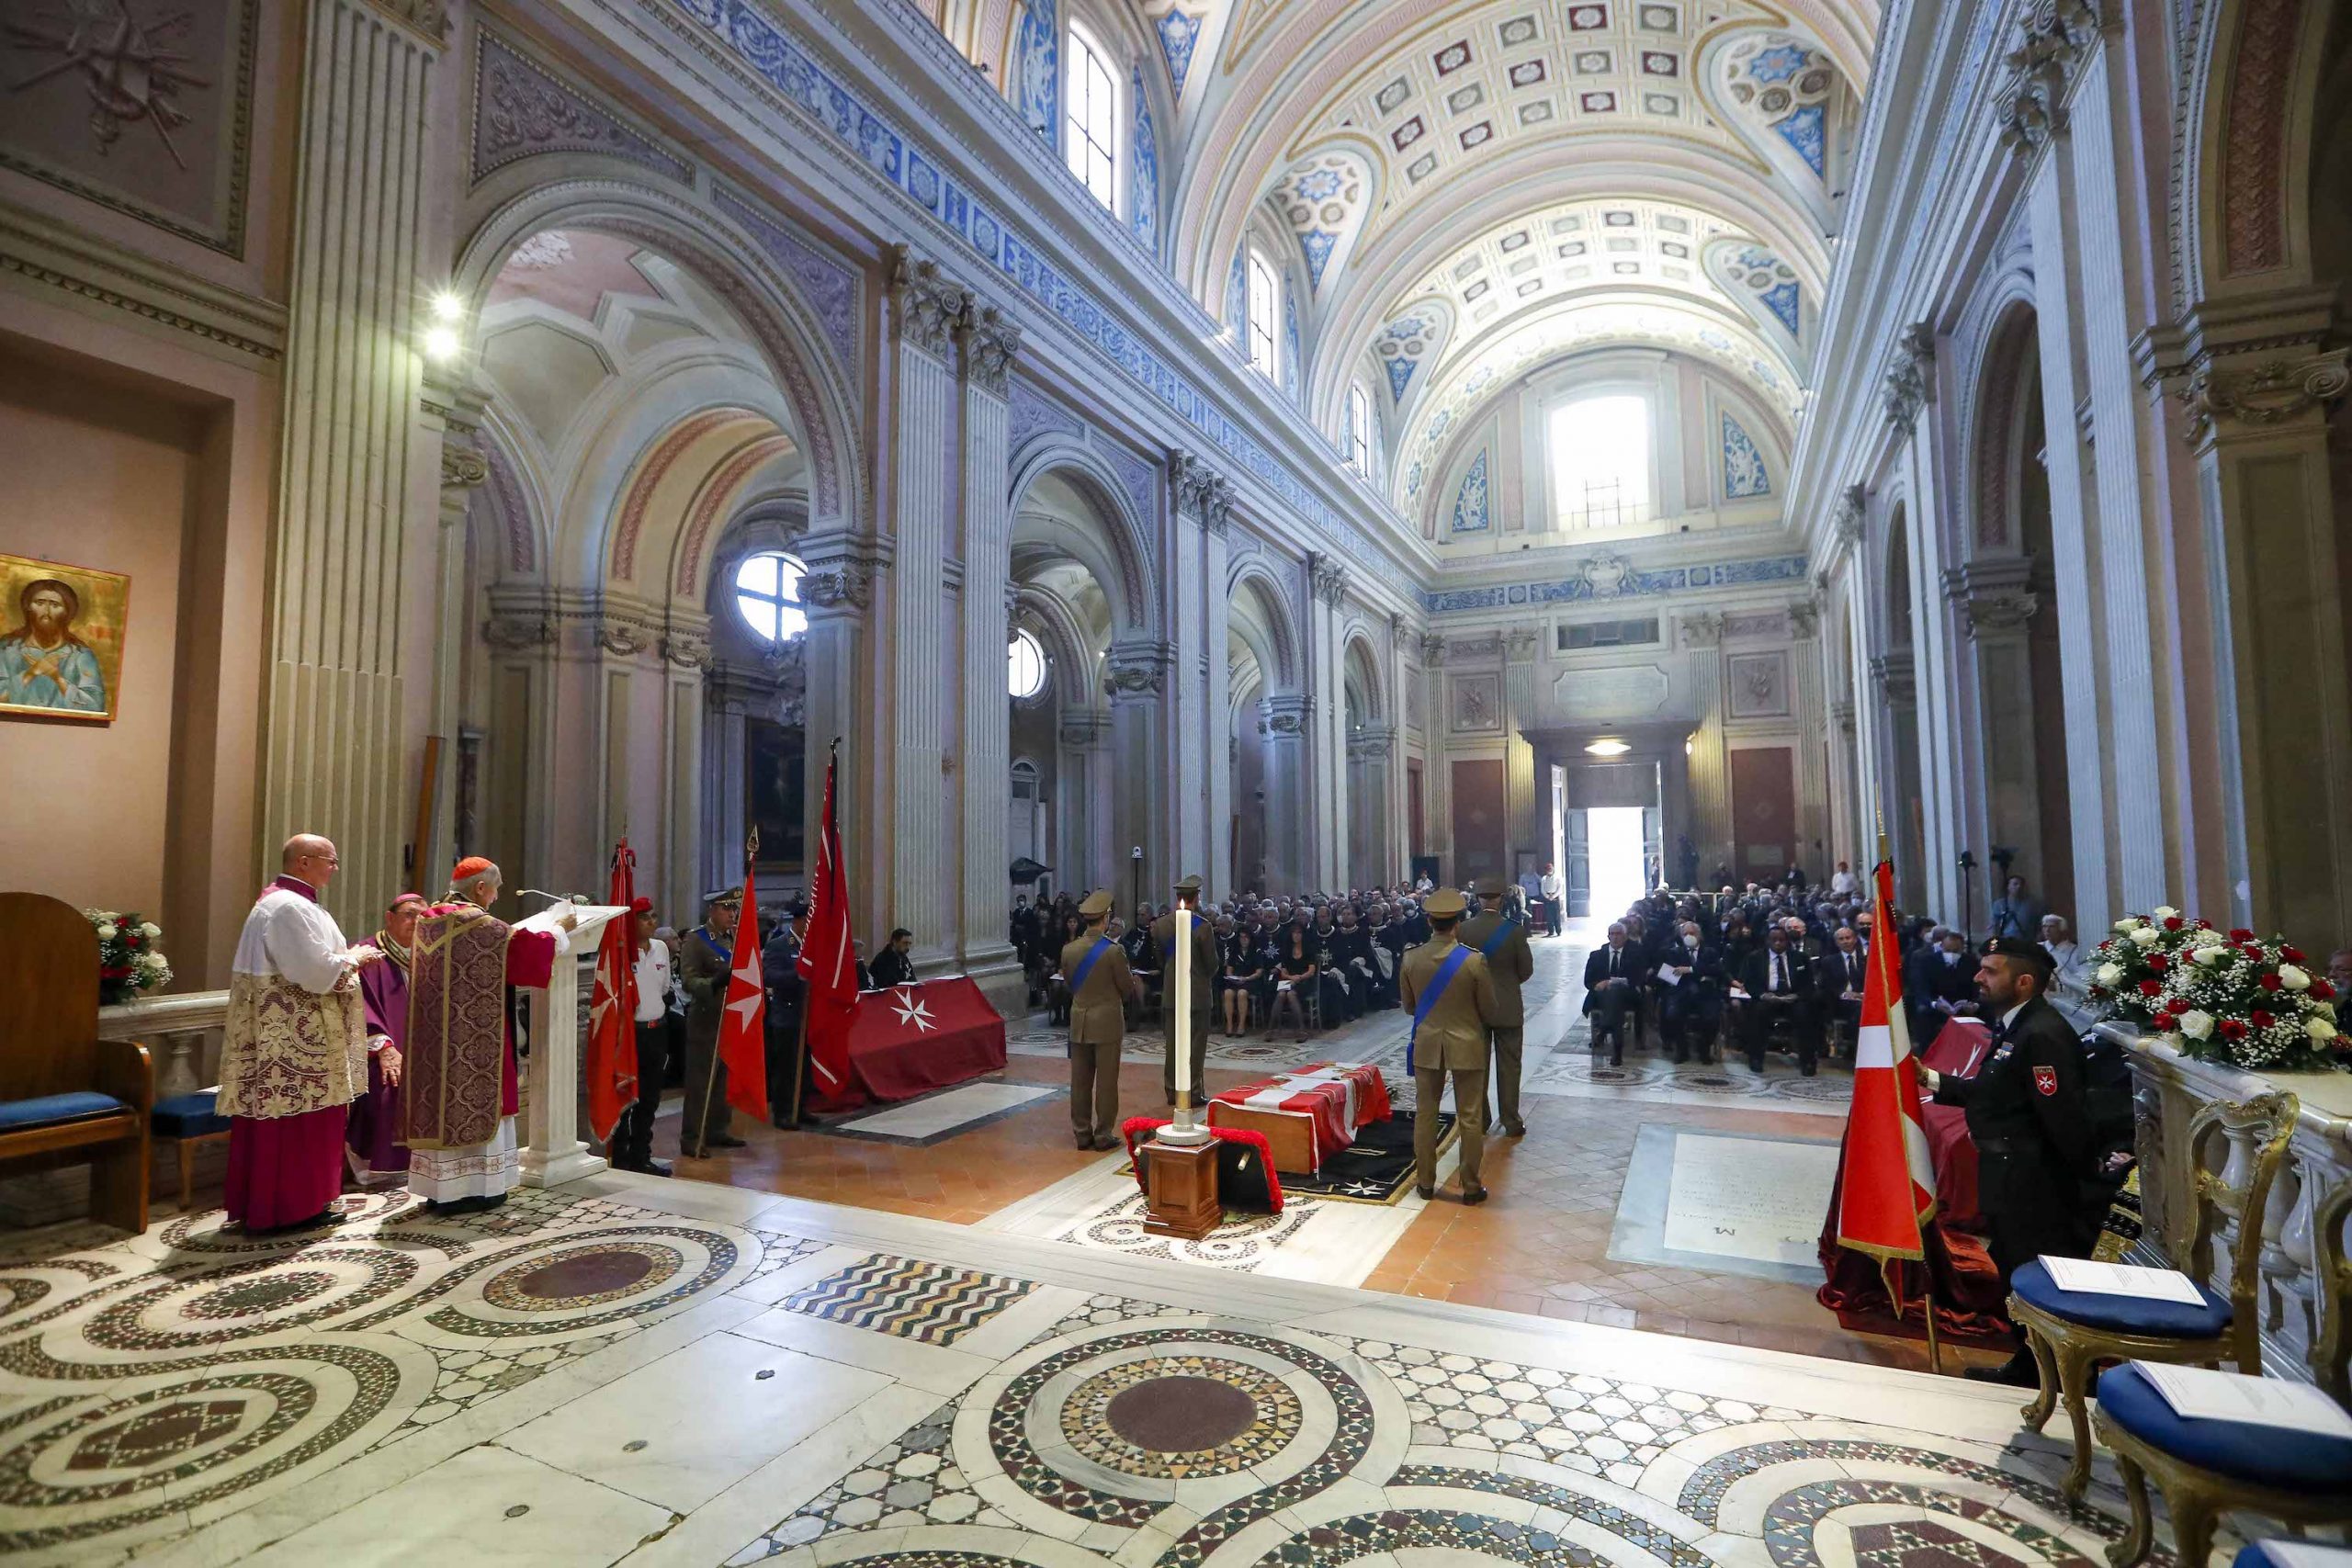 The solemn funeral of Fra’ Marco Luzzago, Lieutenant of the Grand Master